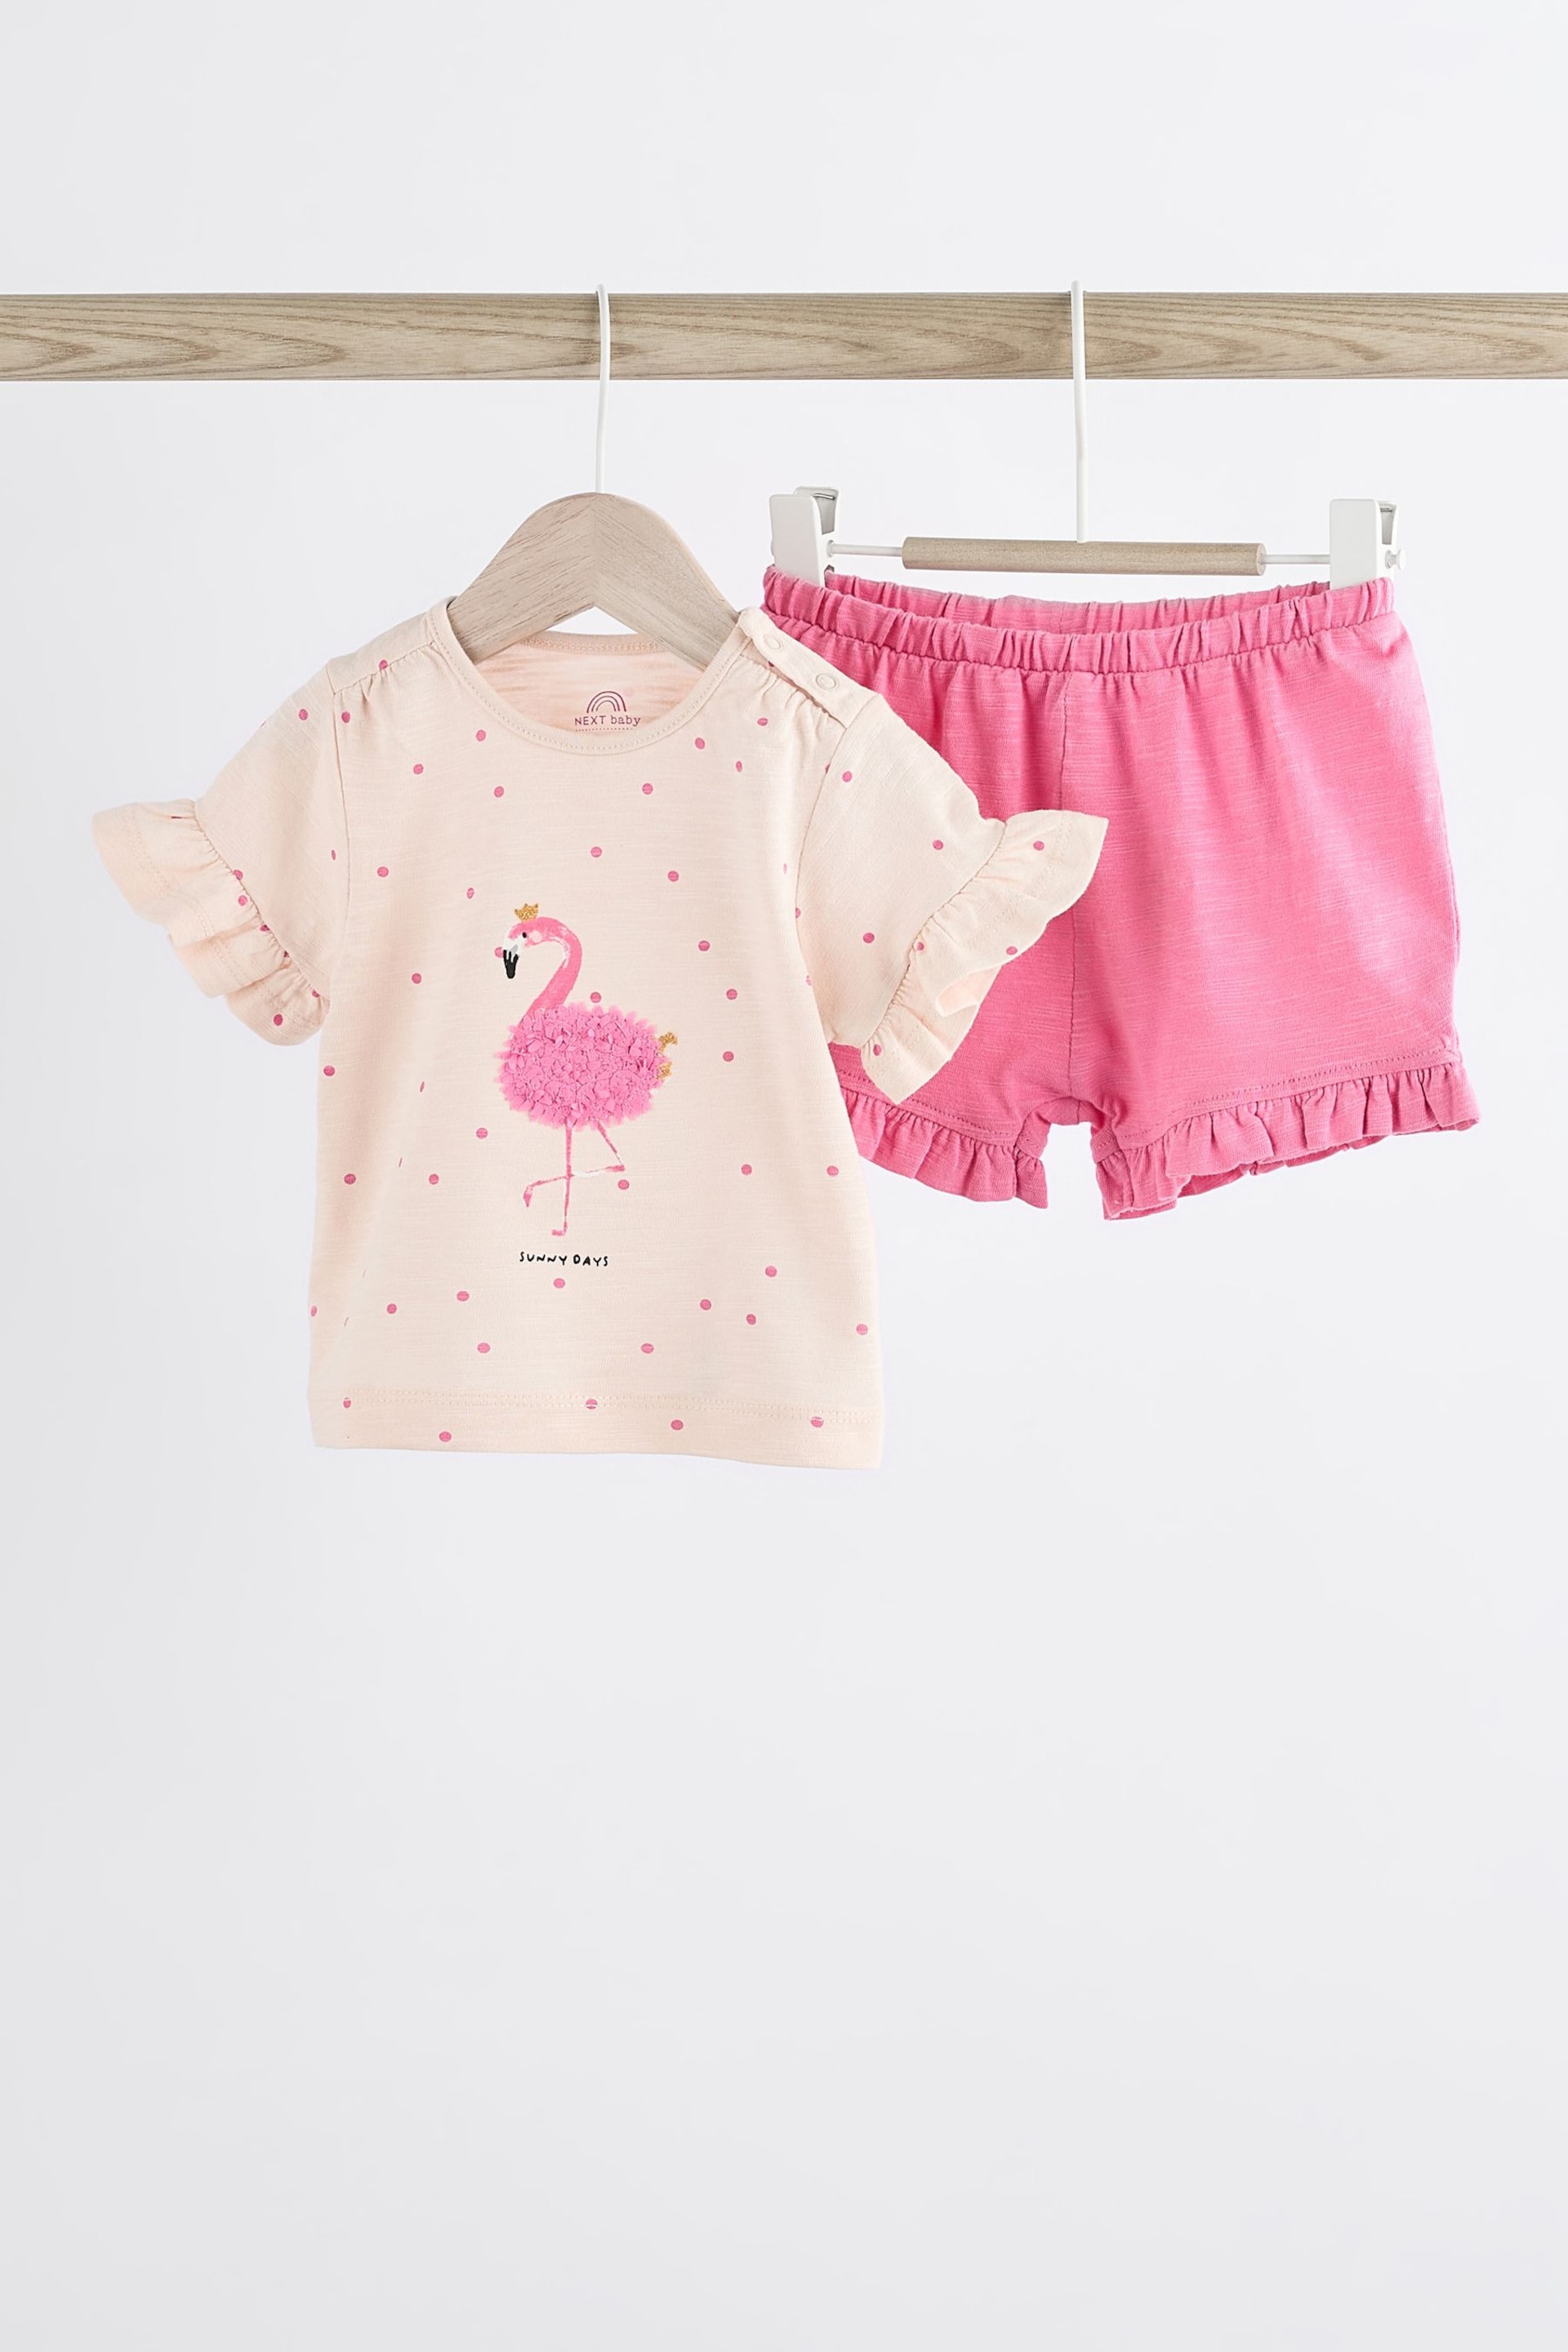 Pink Flamingo Baby Top and Shorts 2 Piece Set - Image 1 of 10